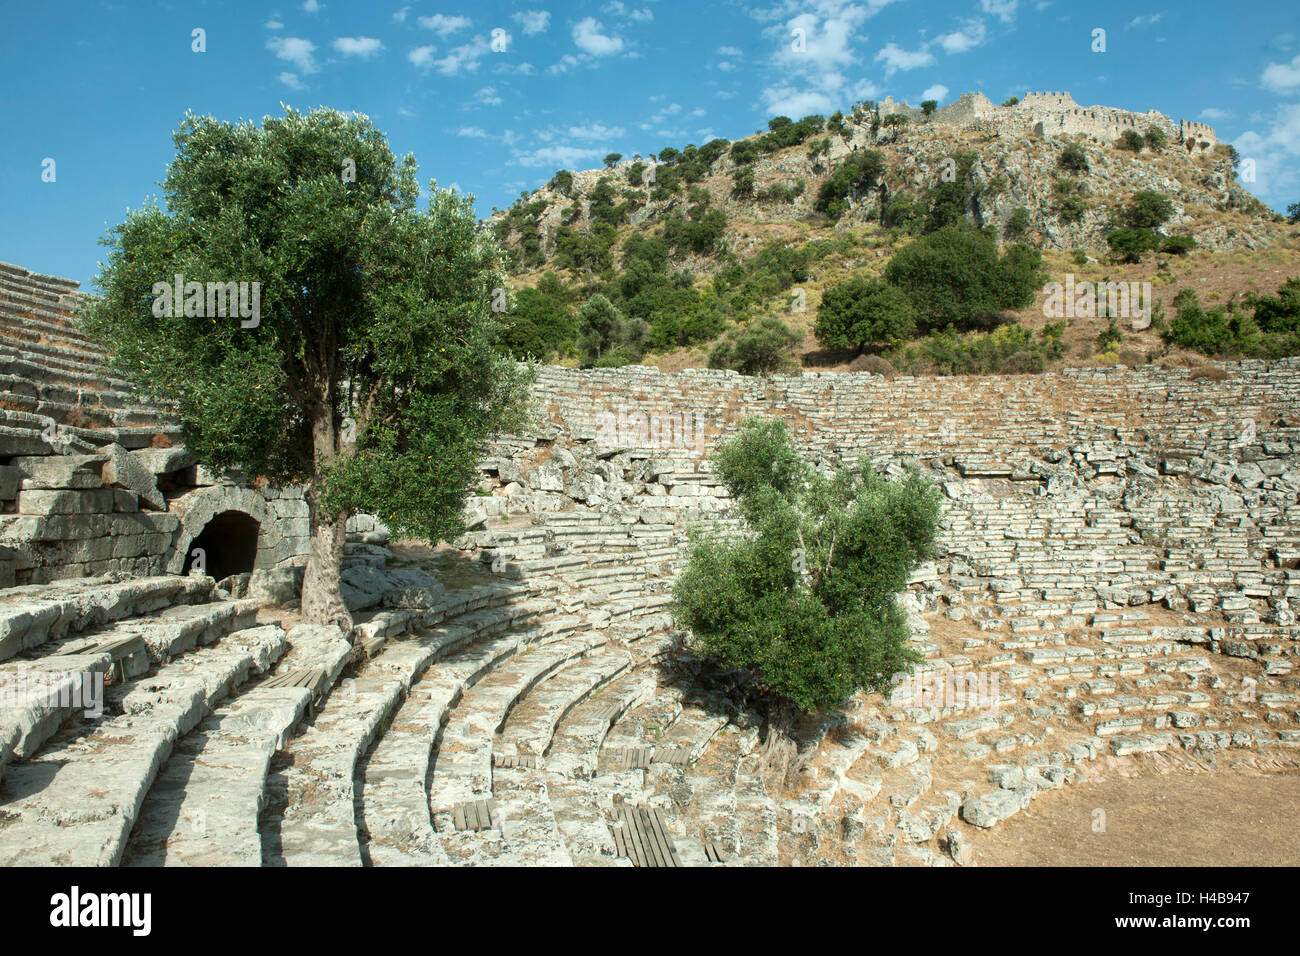 Asia, Turkey, province of Mugla, Dalyan, excavation of Kaunos, view about the theatre to the Acropolis hill Stock Photo